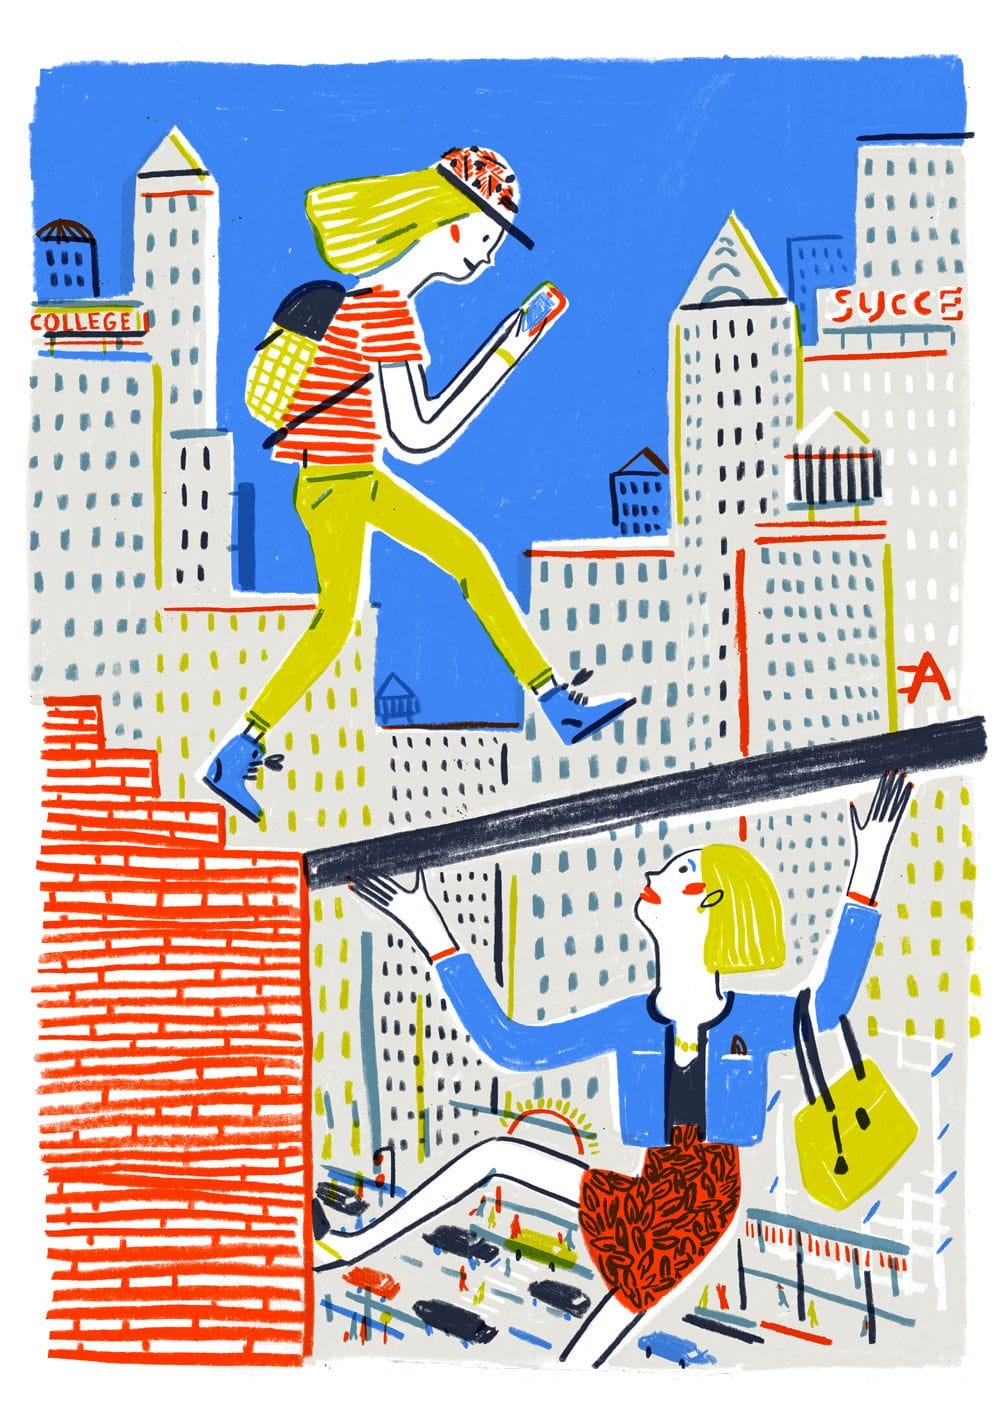 Edith Carron, THE NEW YORKER MAGAZINE « The Terrible Teens » August 2015